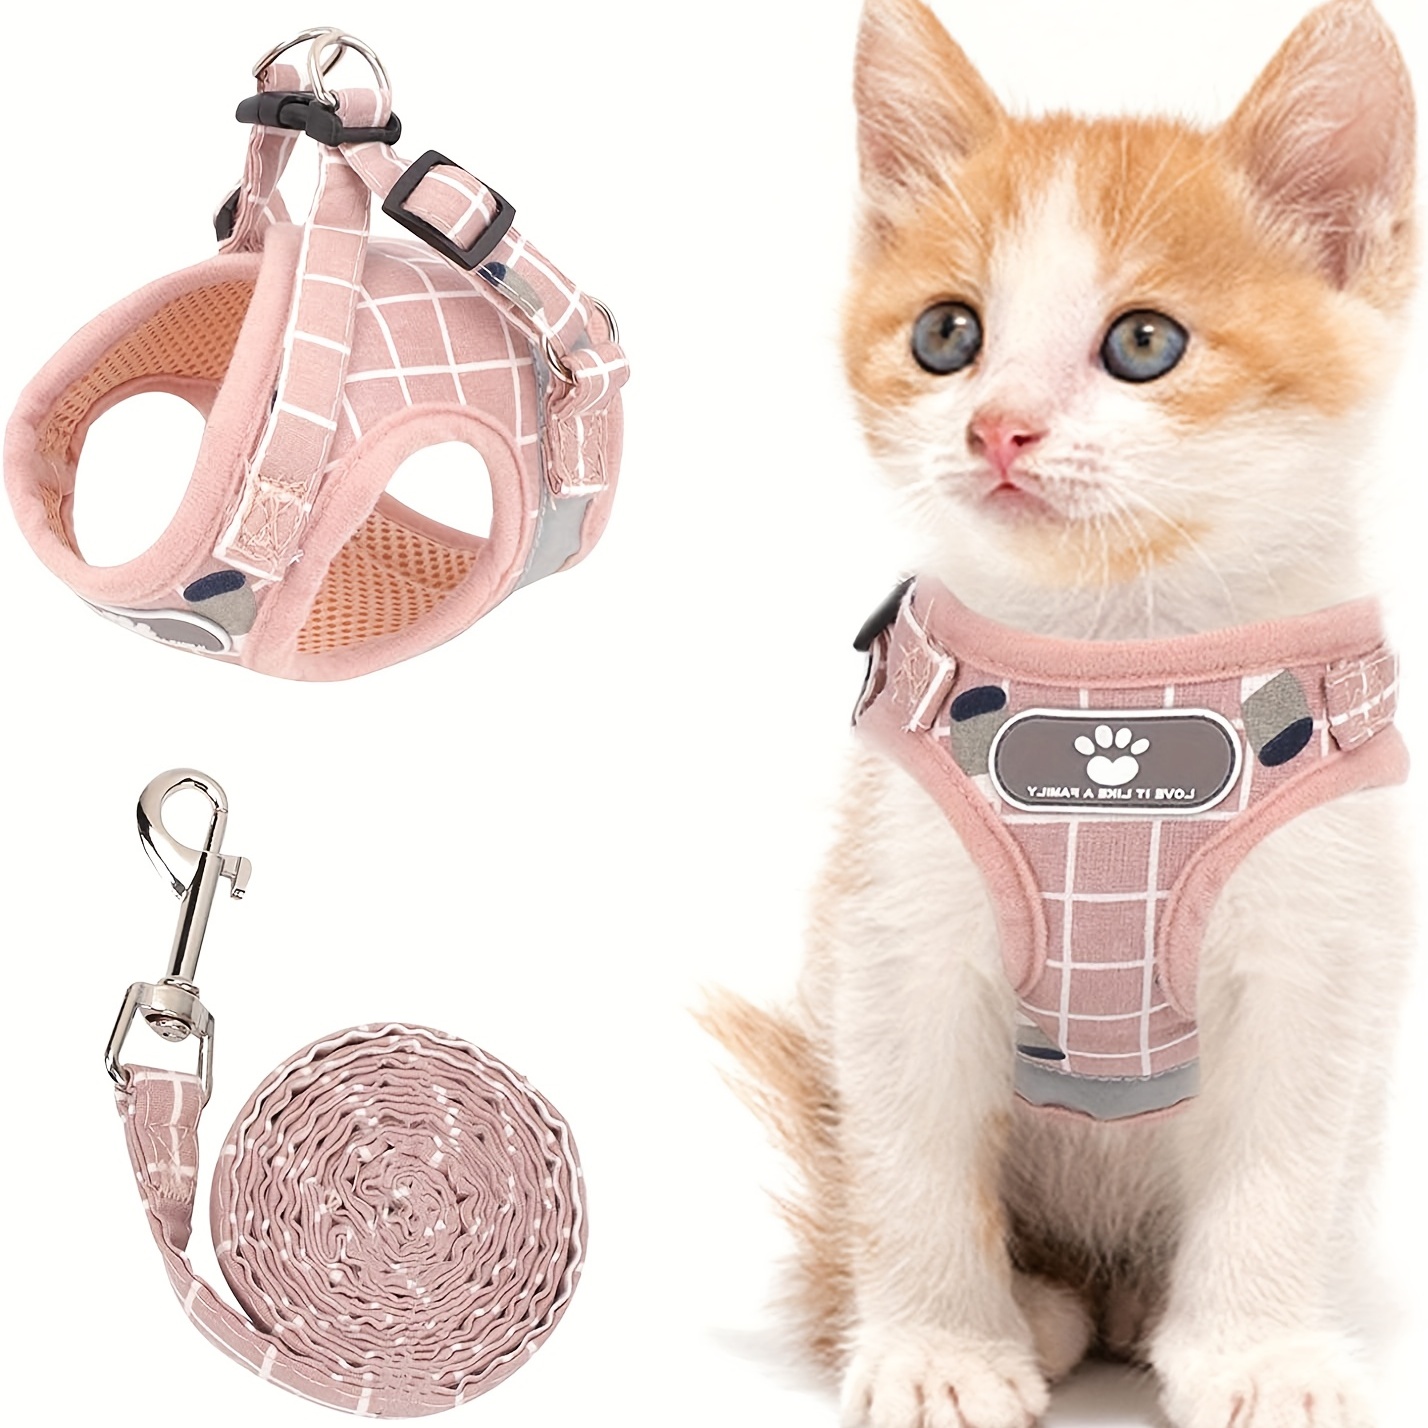 

Cat Vest Harness And Leash Set Small Dog Vest Harness For Walking, Dog Vest Harness For Small Dogs Adjustable Reflective Step Harness For Dogs